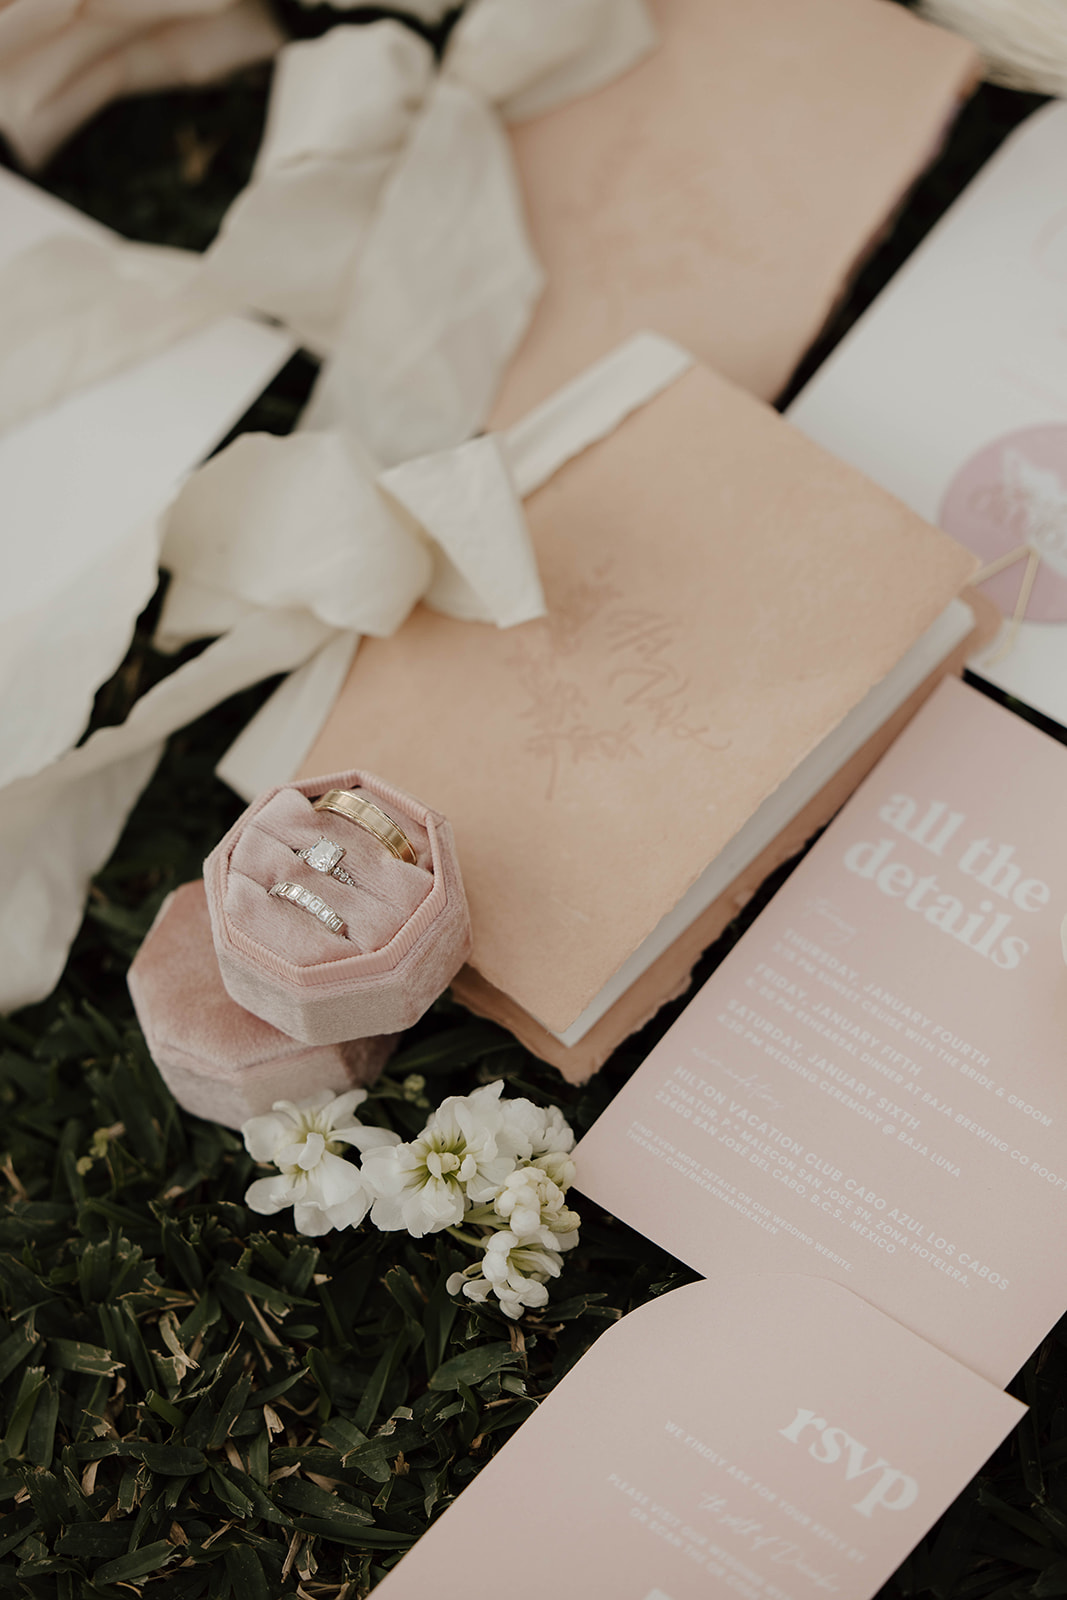 An elegant wedding invitation suite with a ring nestled in a soft pink fabric, accompanied by white florals on a grassy background.